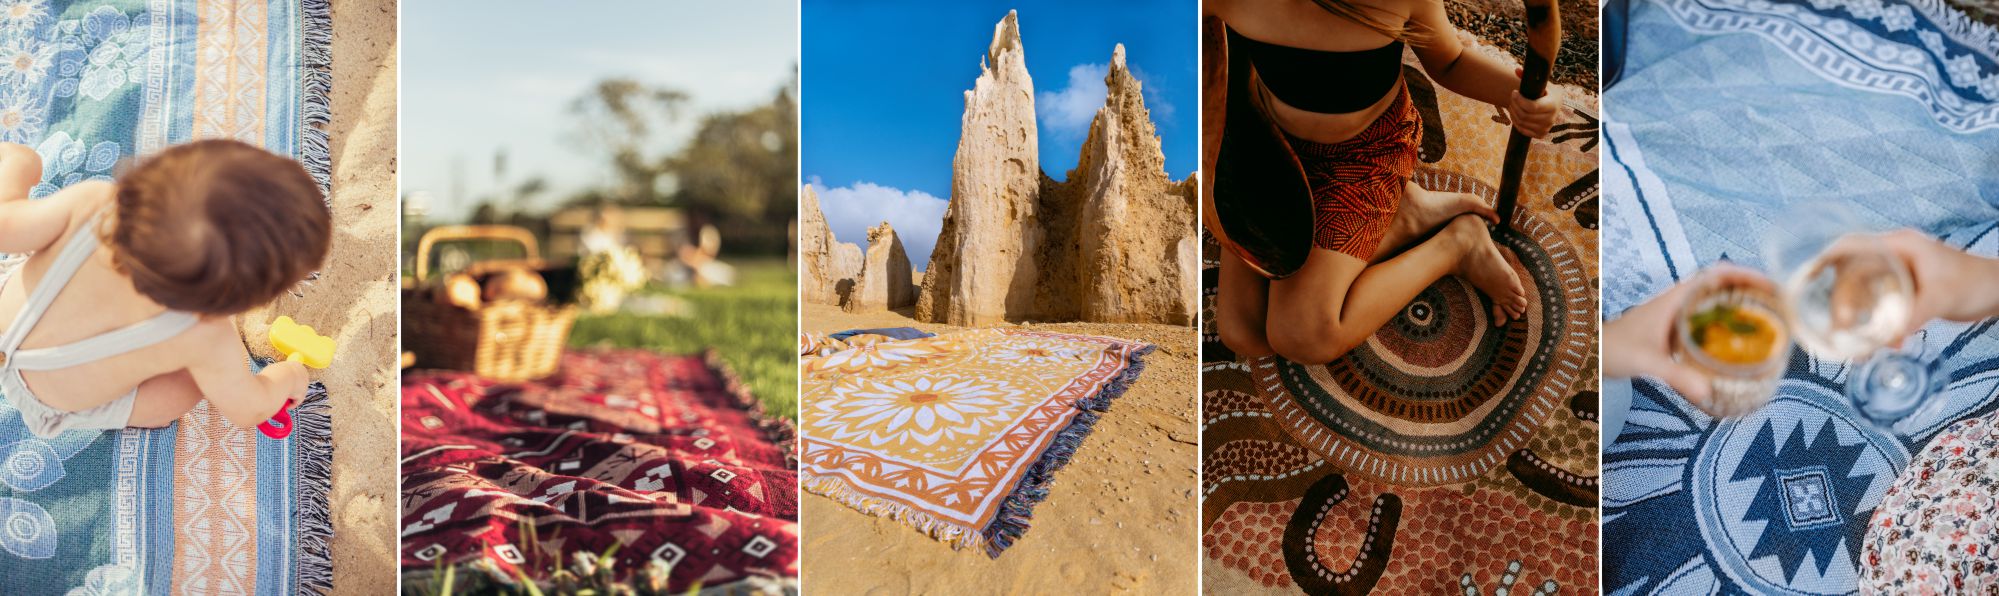 Assorted throw blanket and picnic rug designs. Beach blanekt with baby playing in sand. Red picnic blanket and basket on grass. Yellow rug on sandy desert. Aboriginal design throw. Blue blanket with friends doing a cheers with drinks.